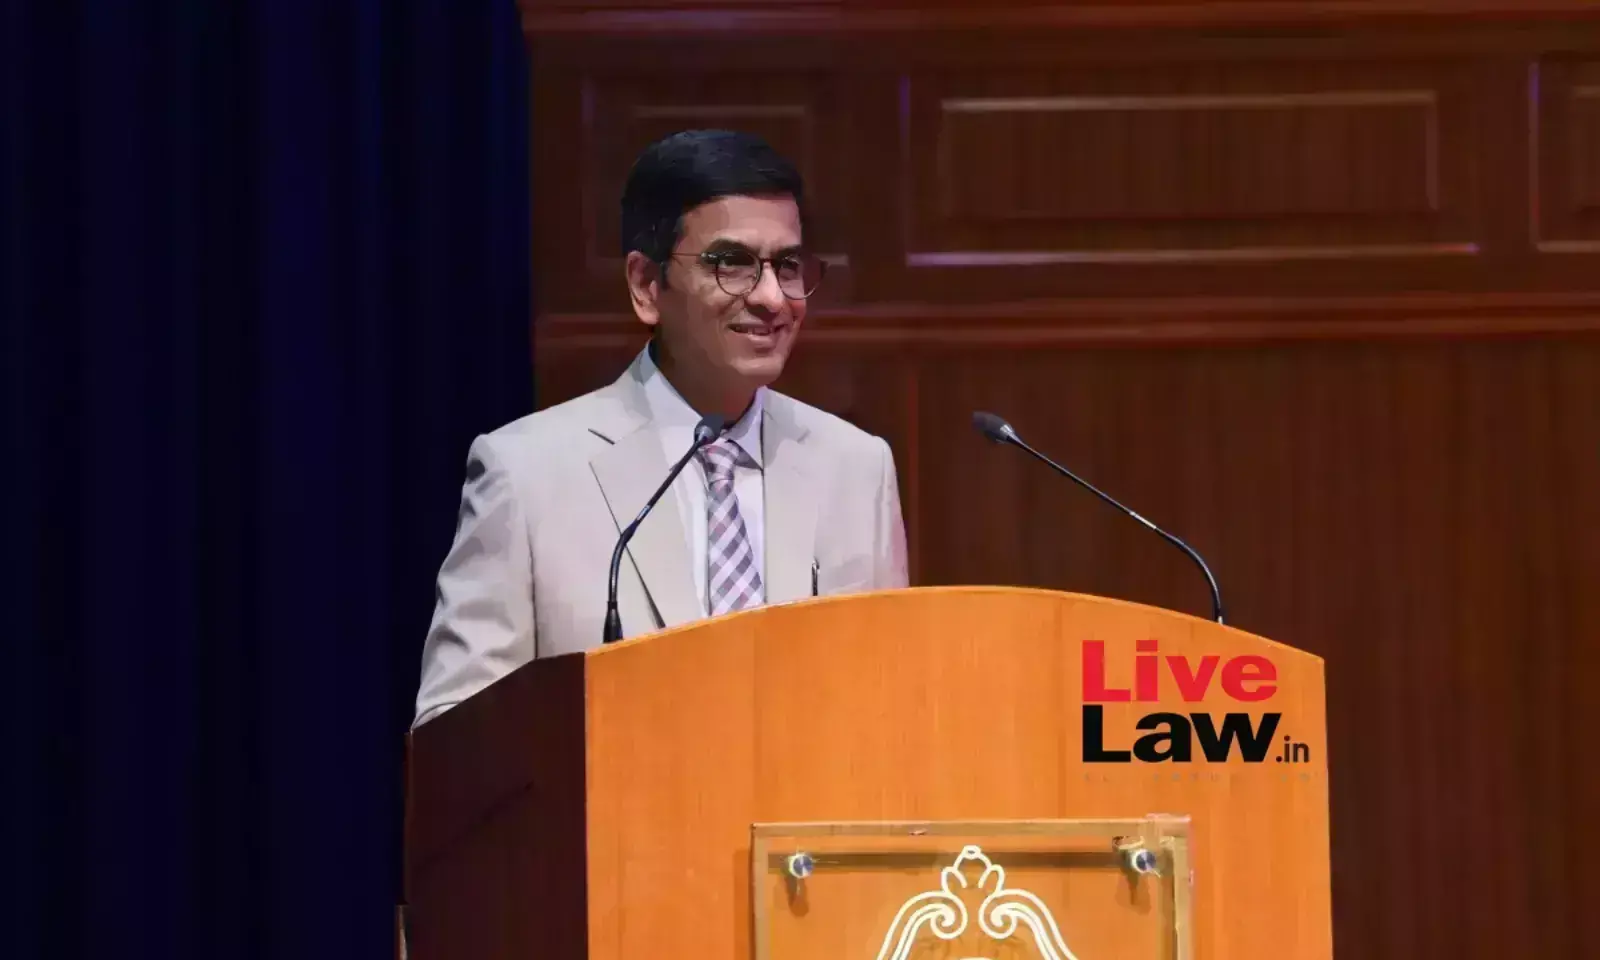 CJI DY Chandrachud Criticises ‘Unjustified’ Seizure of Personal Devices, Advocates for Balanced Search and Seizure Powers